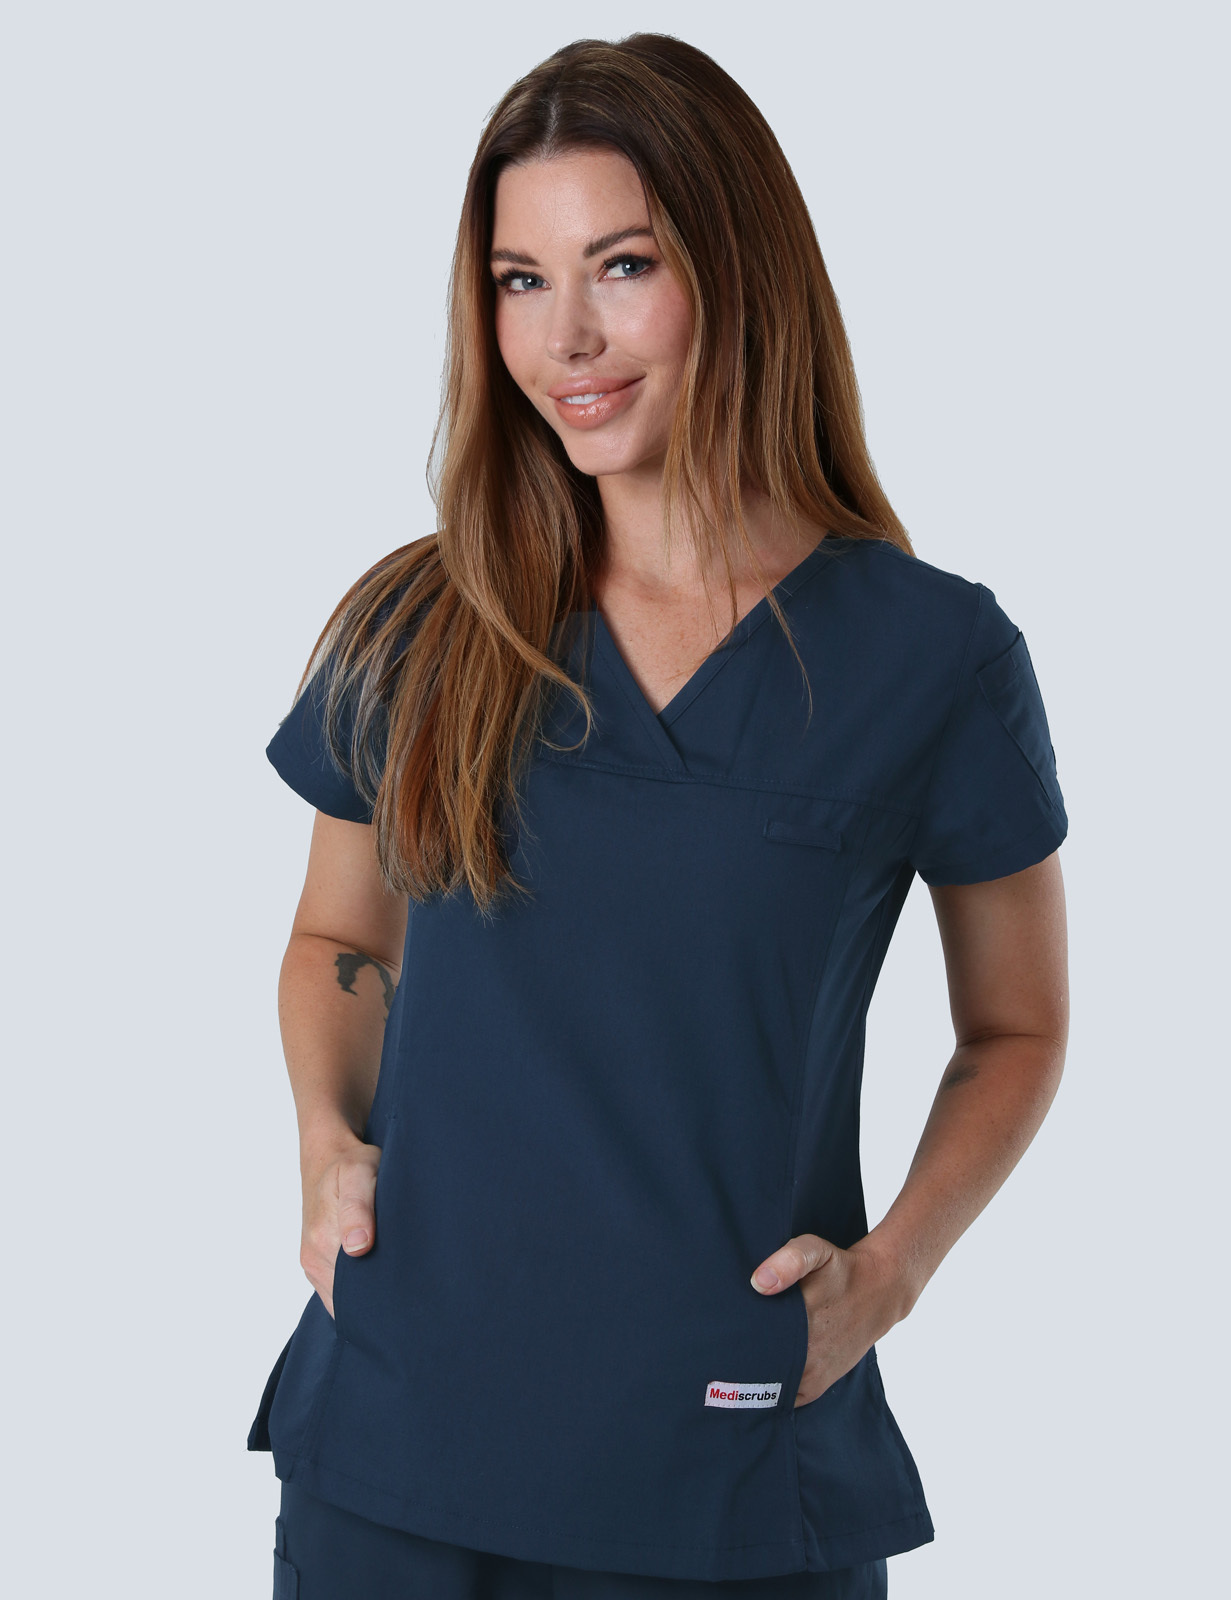 Toowoomba Hospital - ED CN (Women's Fit Solid Scrub Top and Cargo Pants in Navy incl Logos)